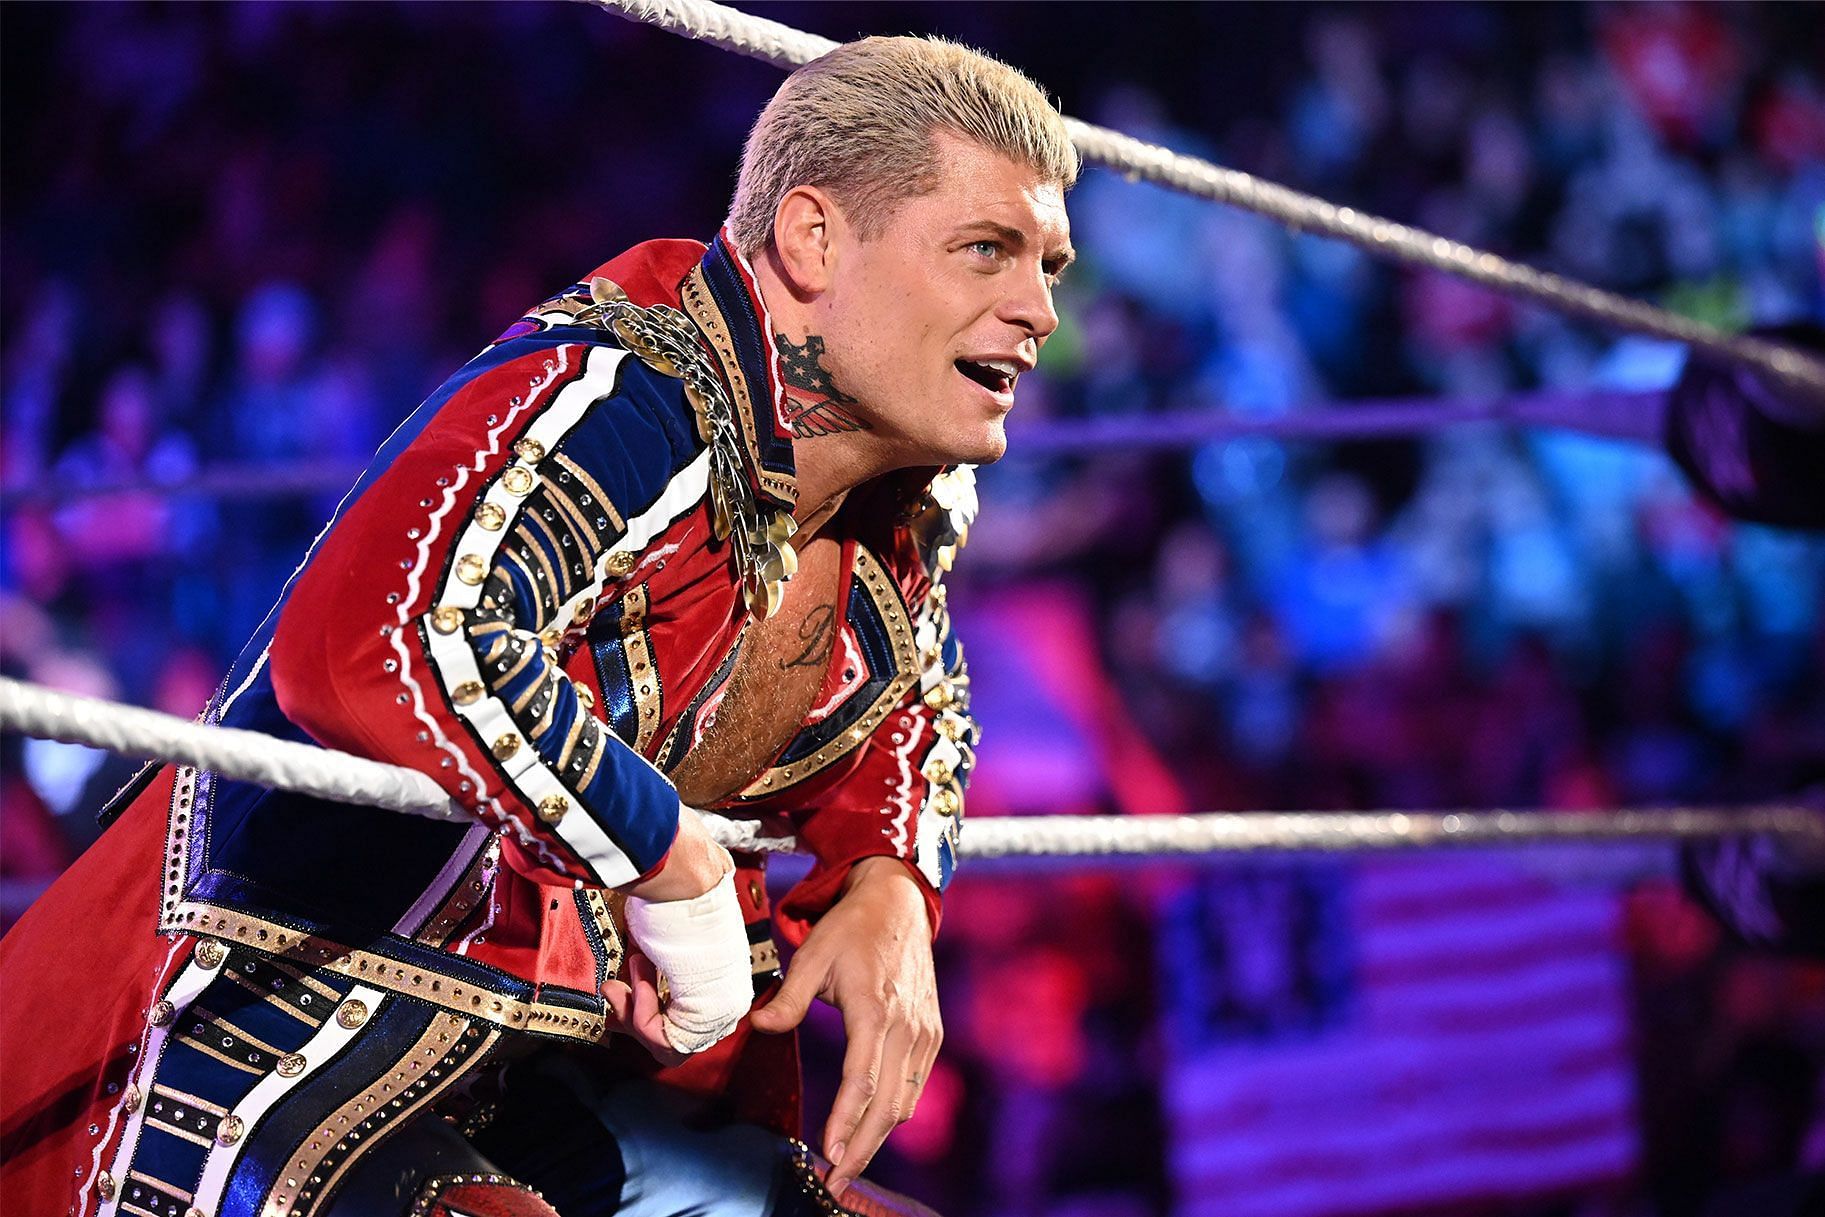 Rhodes could be a surprise entrant in the 2023 Royal Rumble.